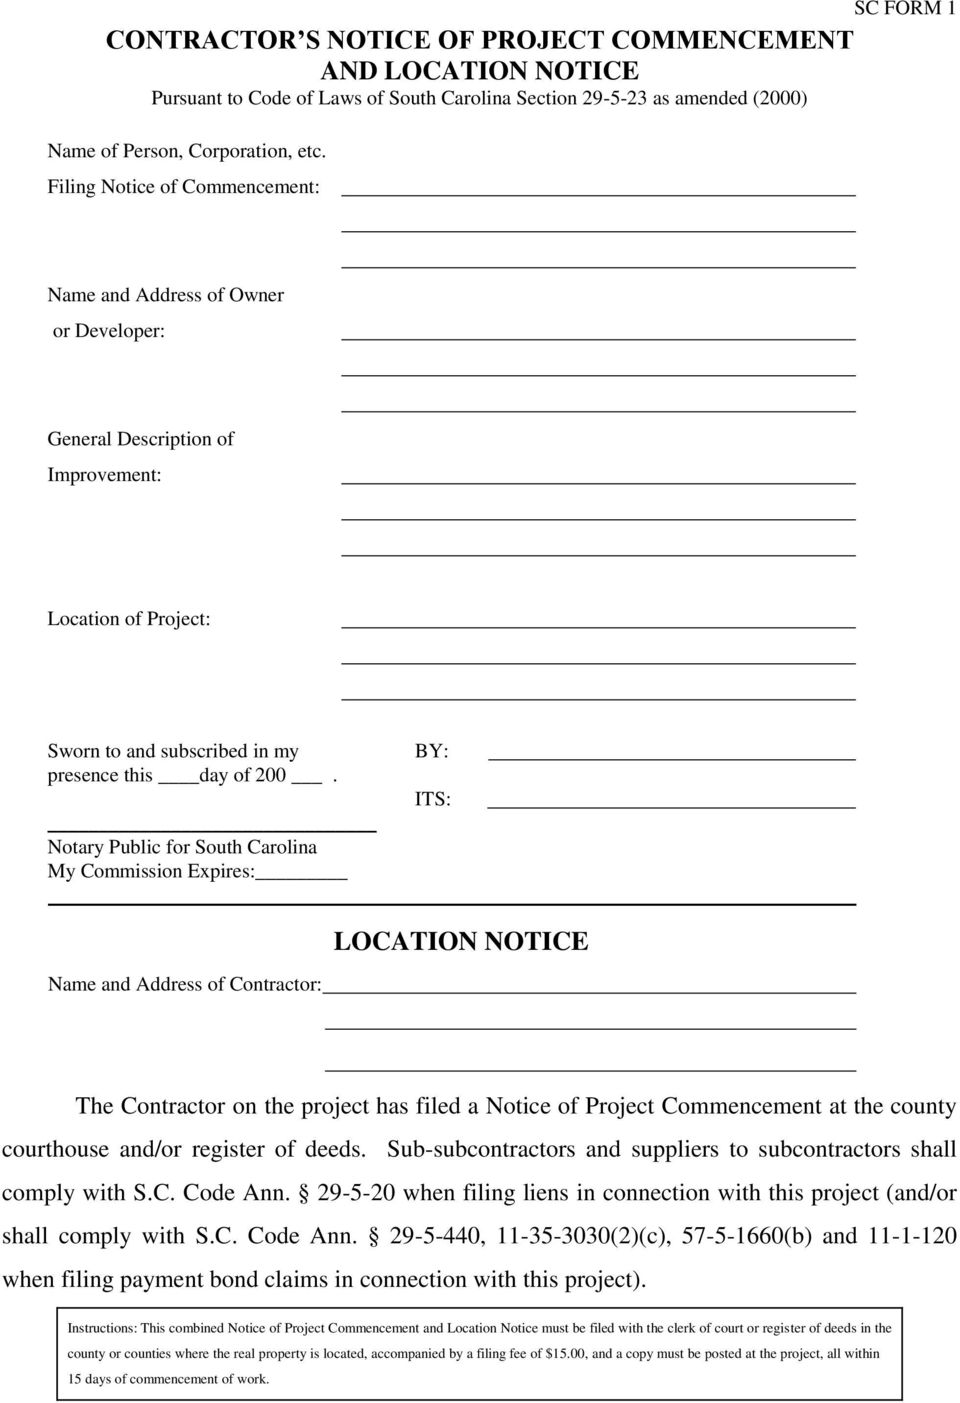 Notary Public for South Carolina My Commission Expires: BY: ITS: LOCATION NOTICE Name and Address of Contractor: The Contractor on the project has filed a Notice of Project Commencement at the county